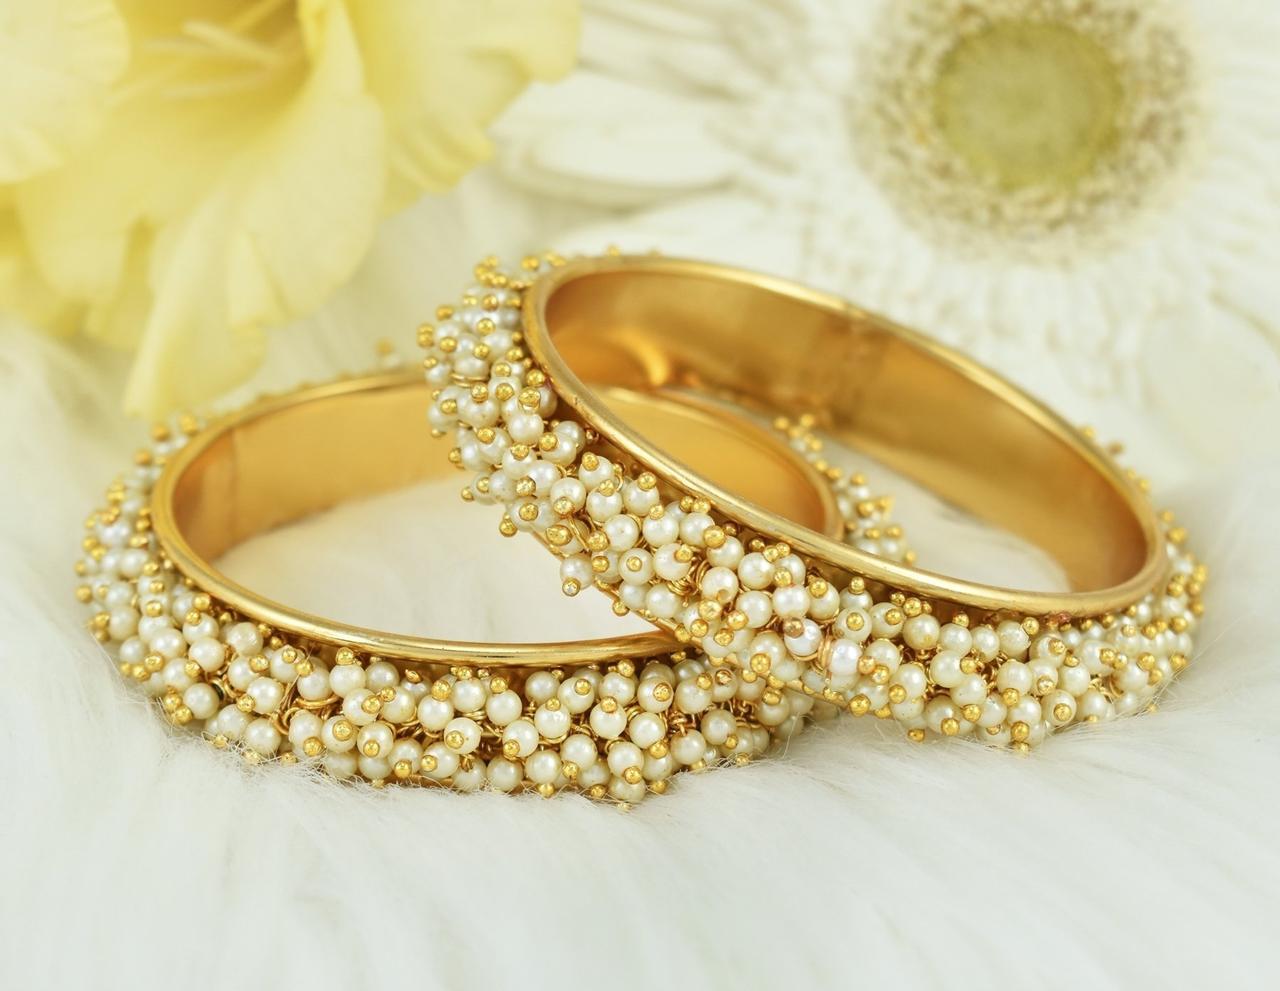 5 Handmade Bangles Which Beautifully Double Up As Wedding Gifts For The ...